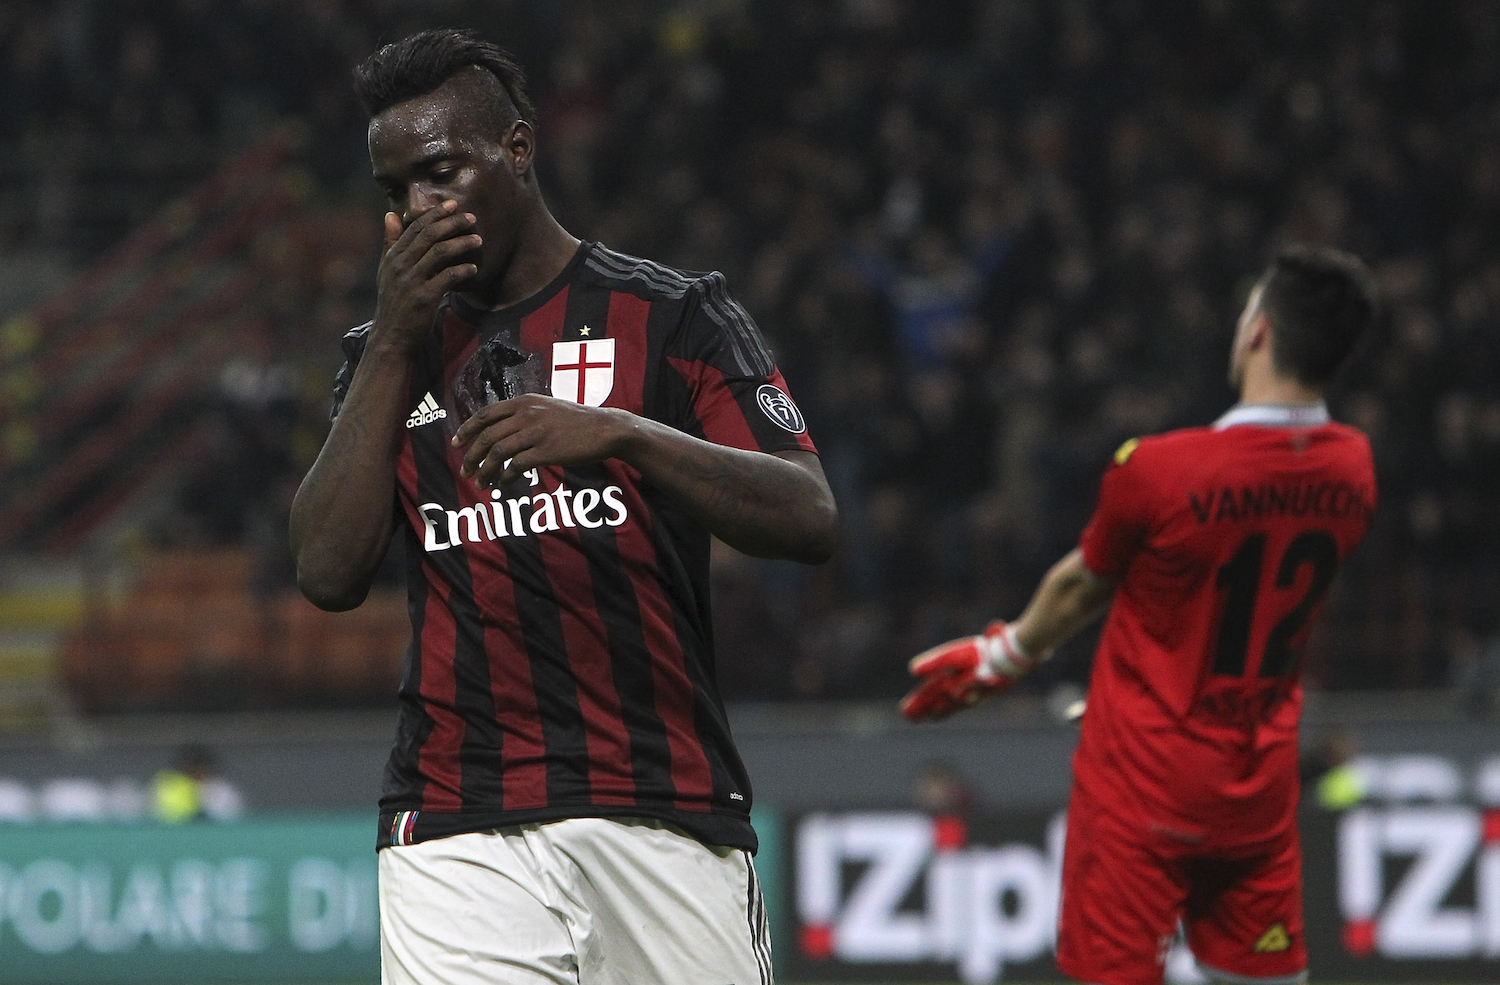 Balo also bagged against Alessandria. | Marco Luzzani/Getty Images